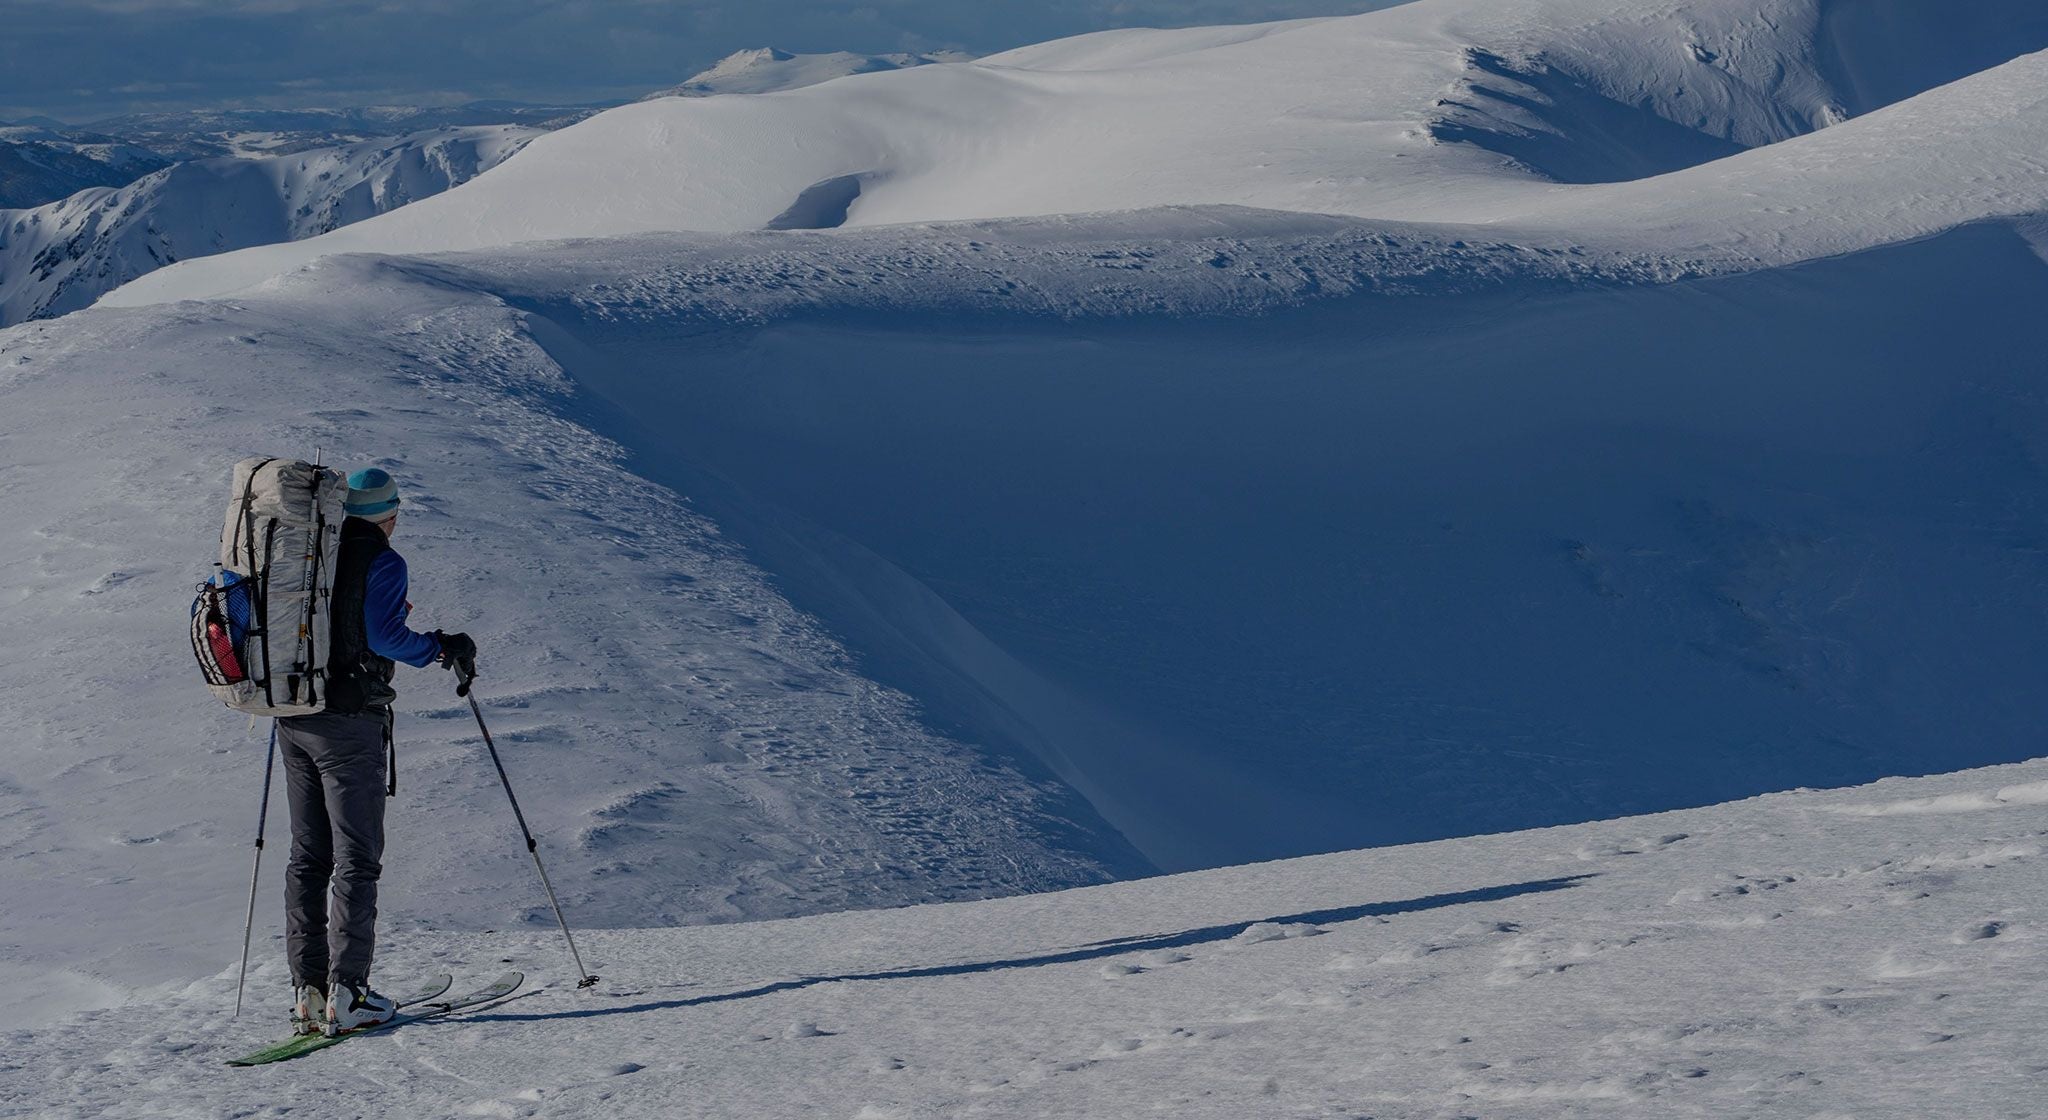 A person on skis standing on top of a snow covered mountain.